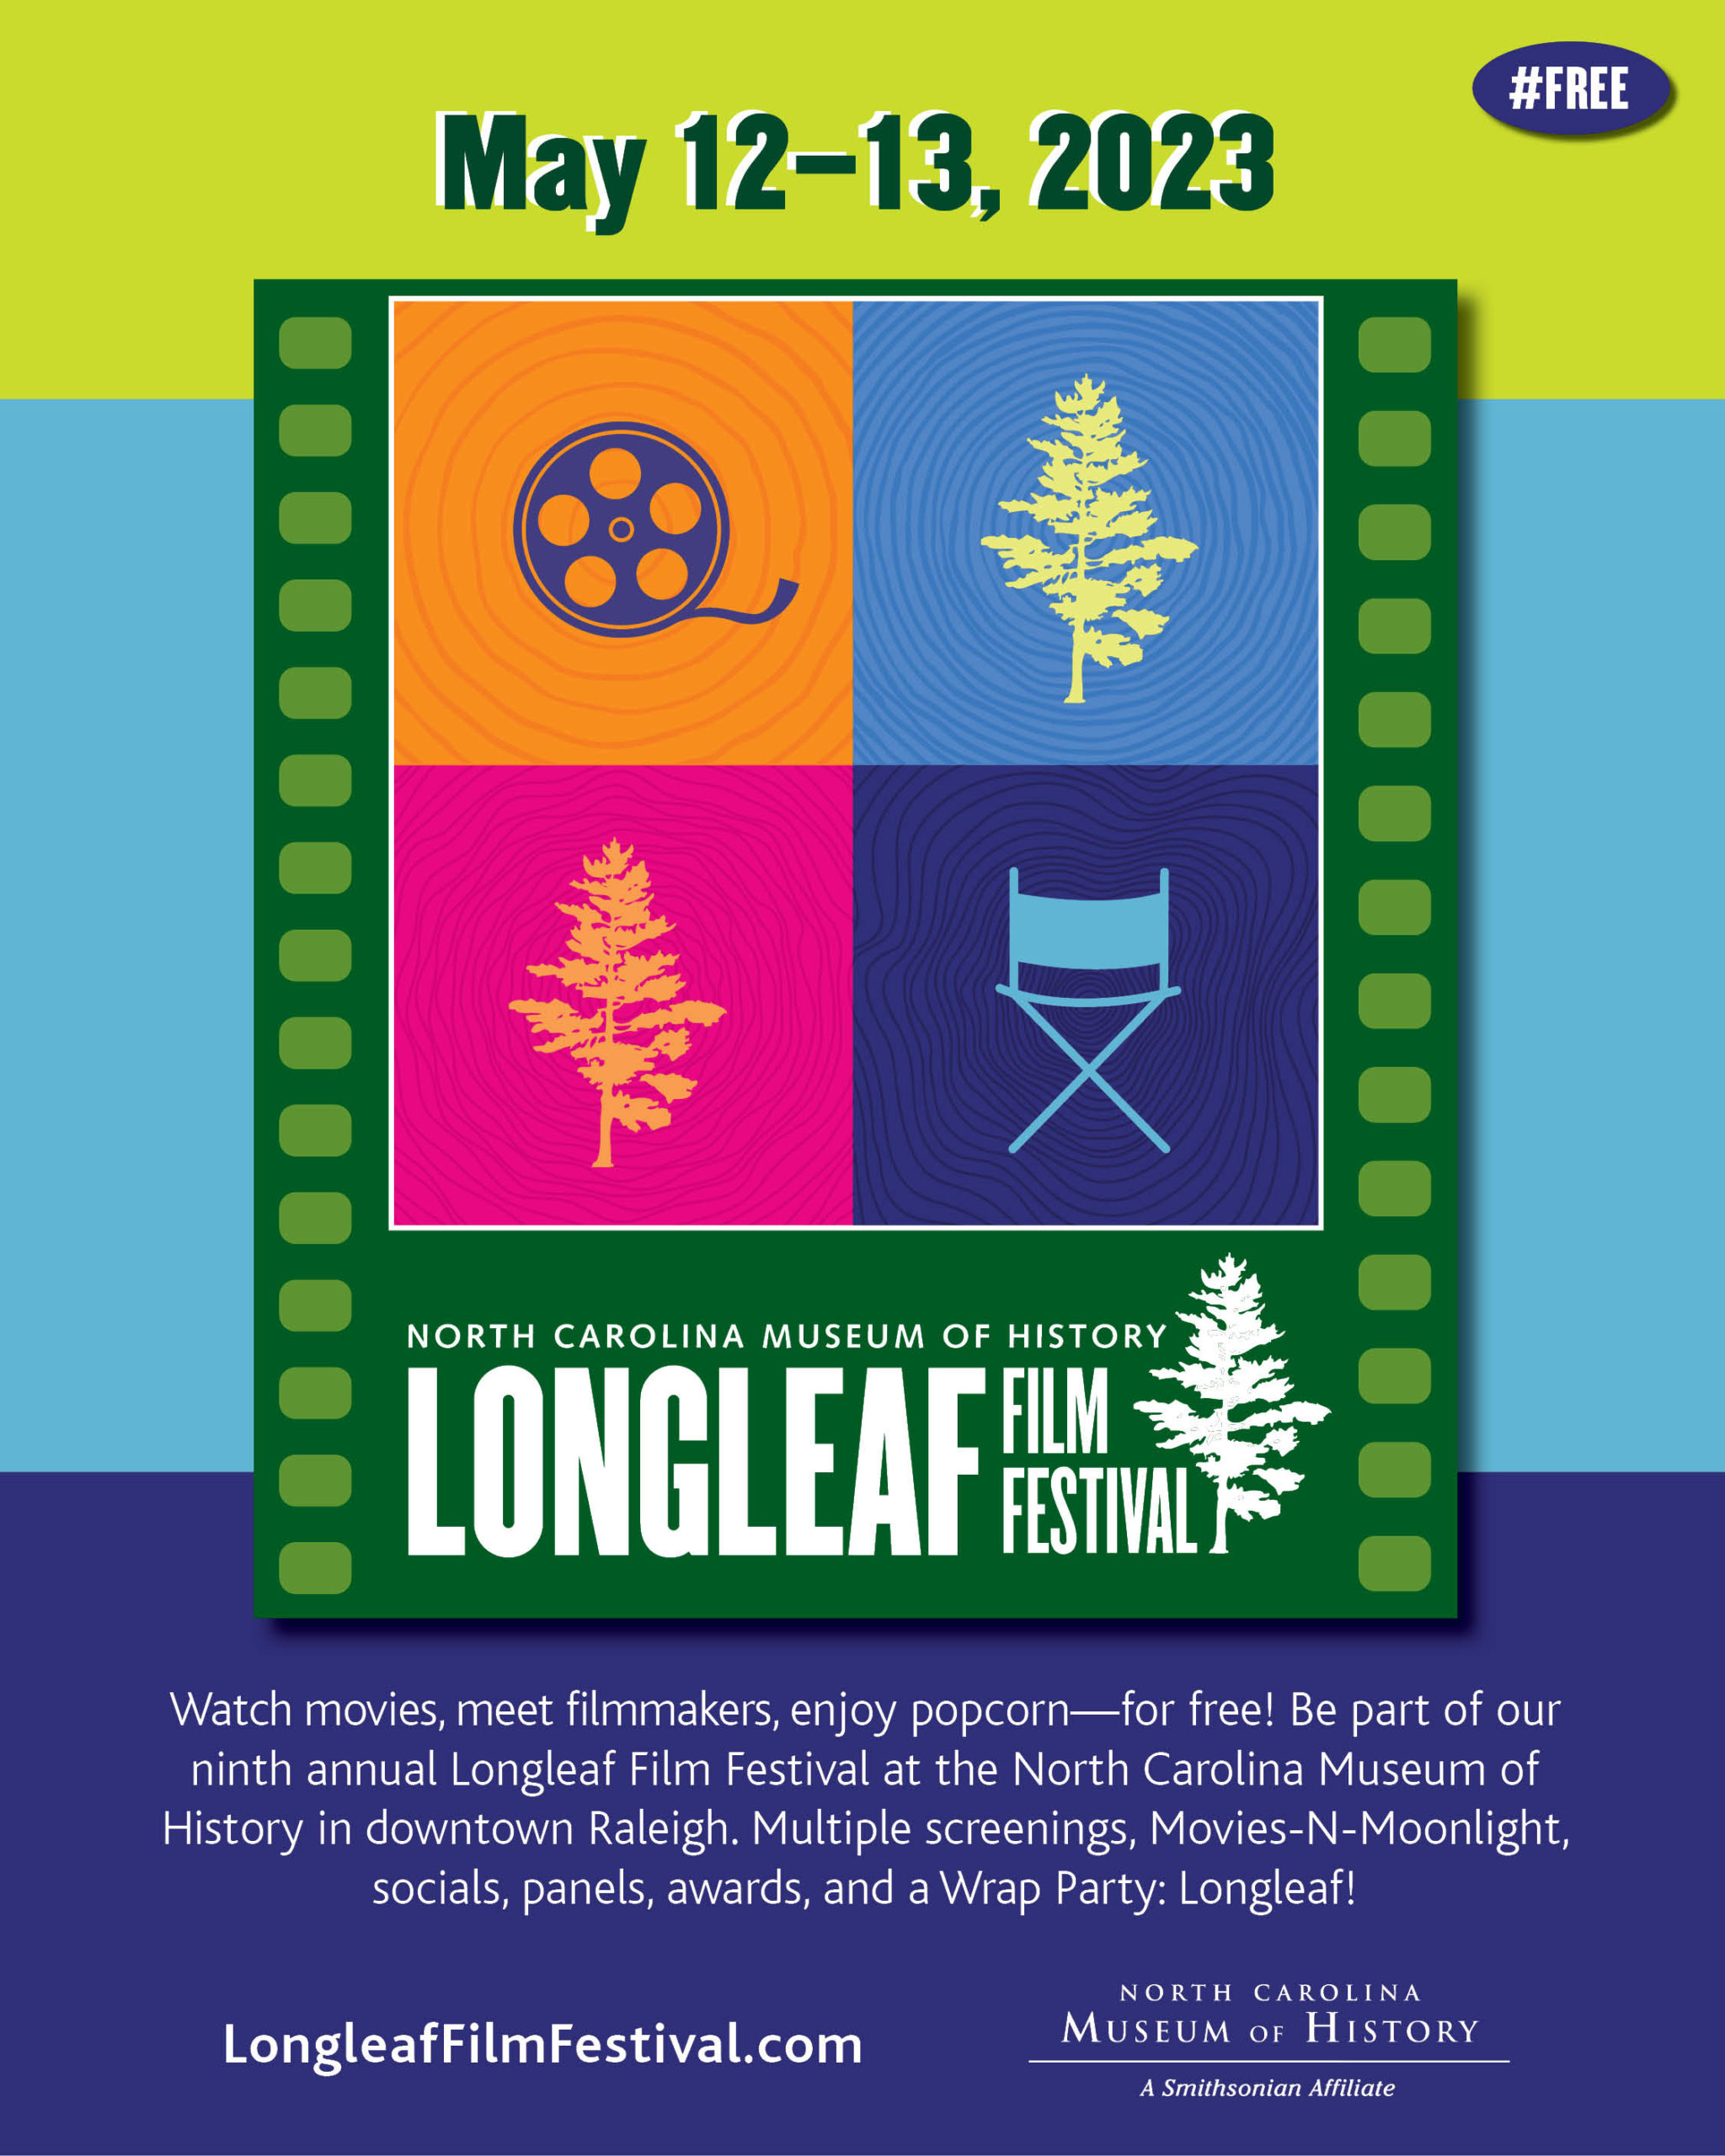 Longleaf Film Festivall 2023 was held at the North Carolina Museum of History